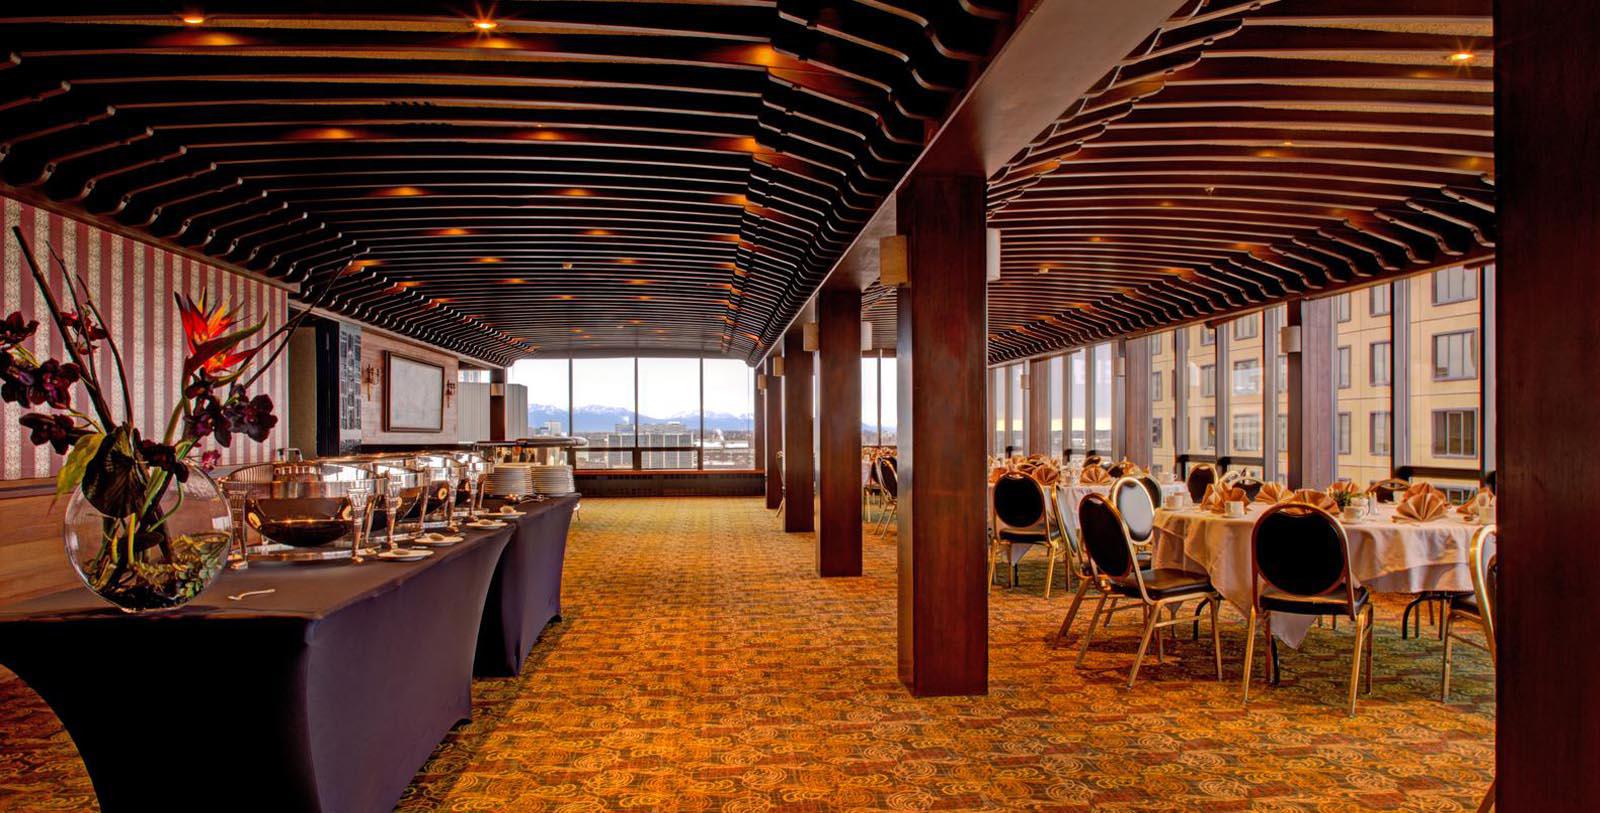 Image of Quarter Deck Meeting Room, Hotel Captain Cook in Anchorage, Alaska, 1956, Member of Historic Hotels of America, RFP